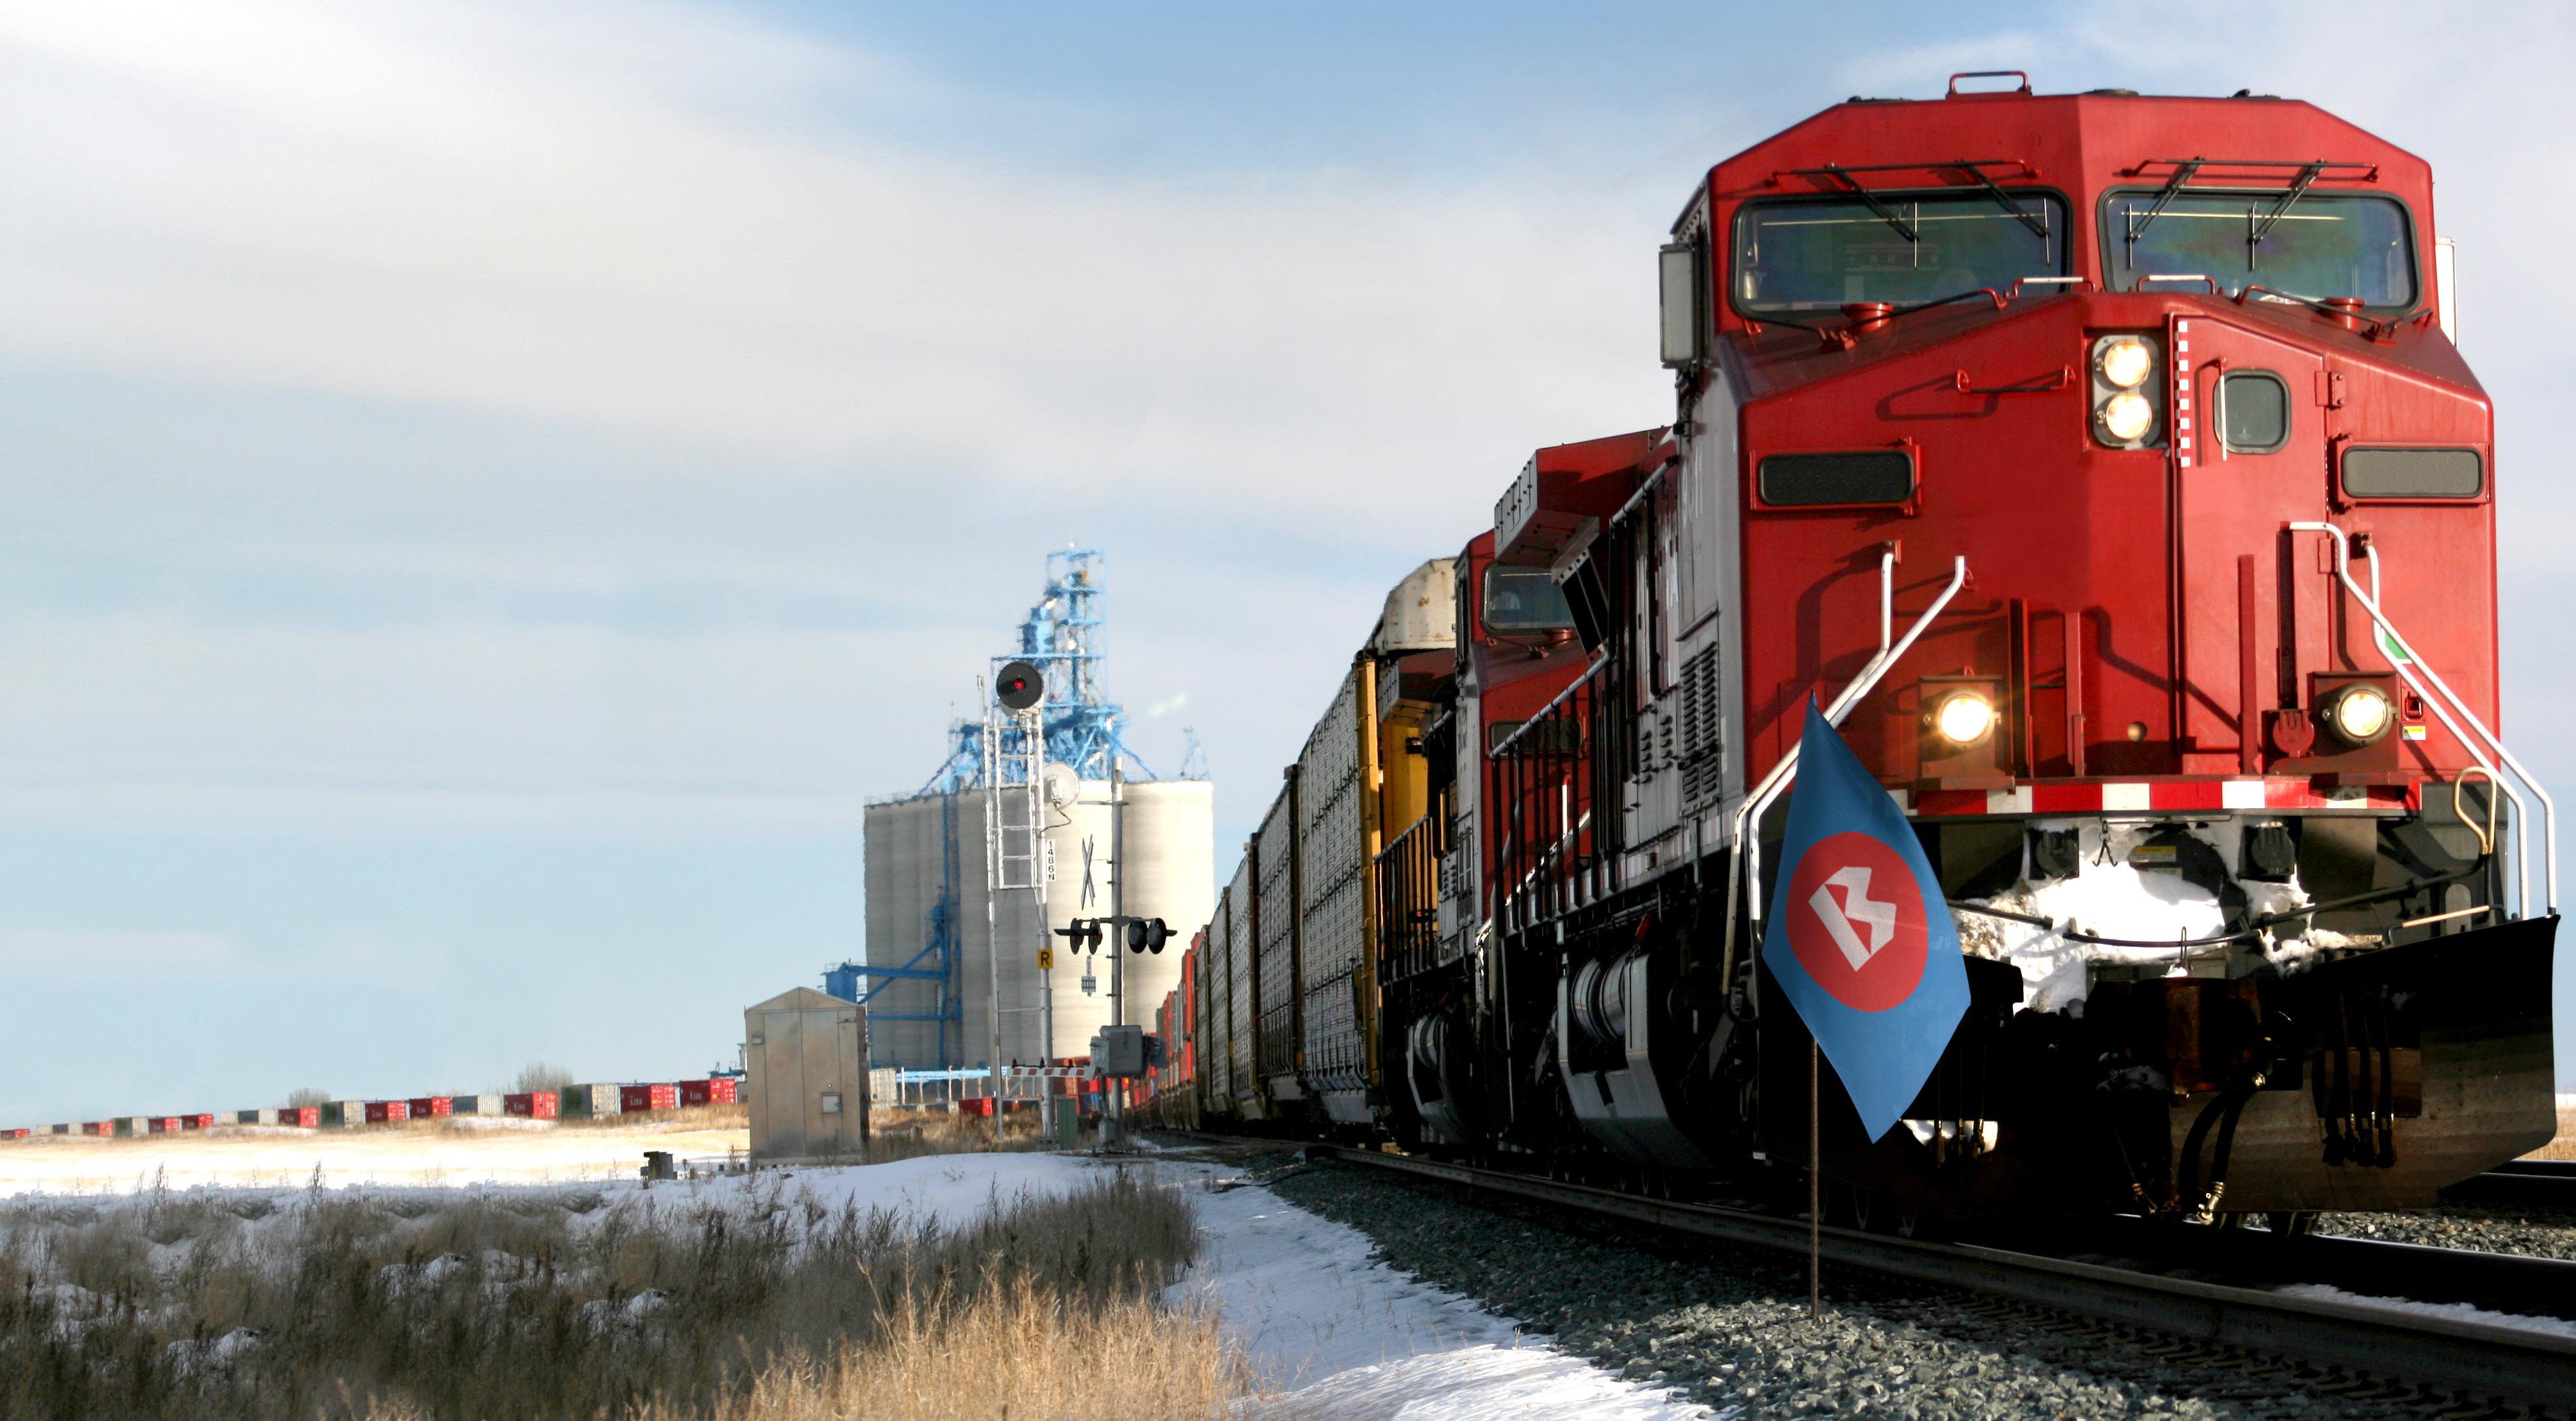 Train bringing goods from Canada to the United States.